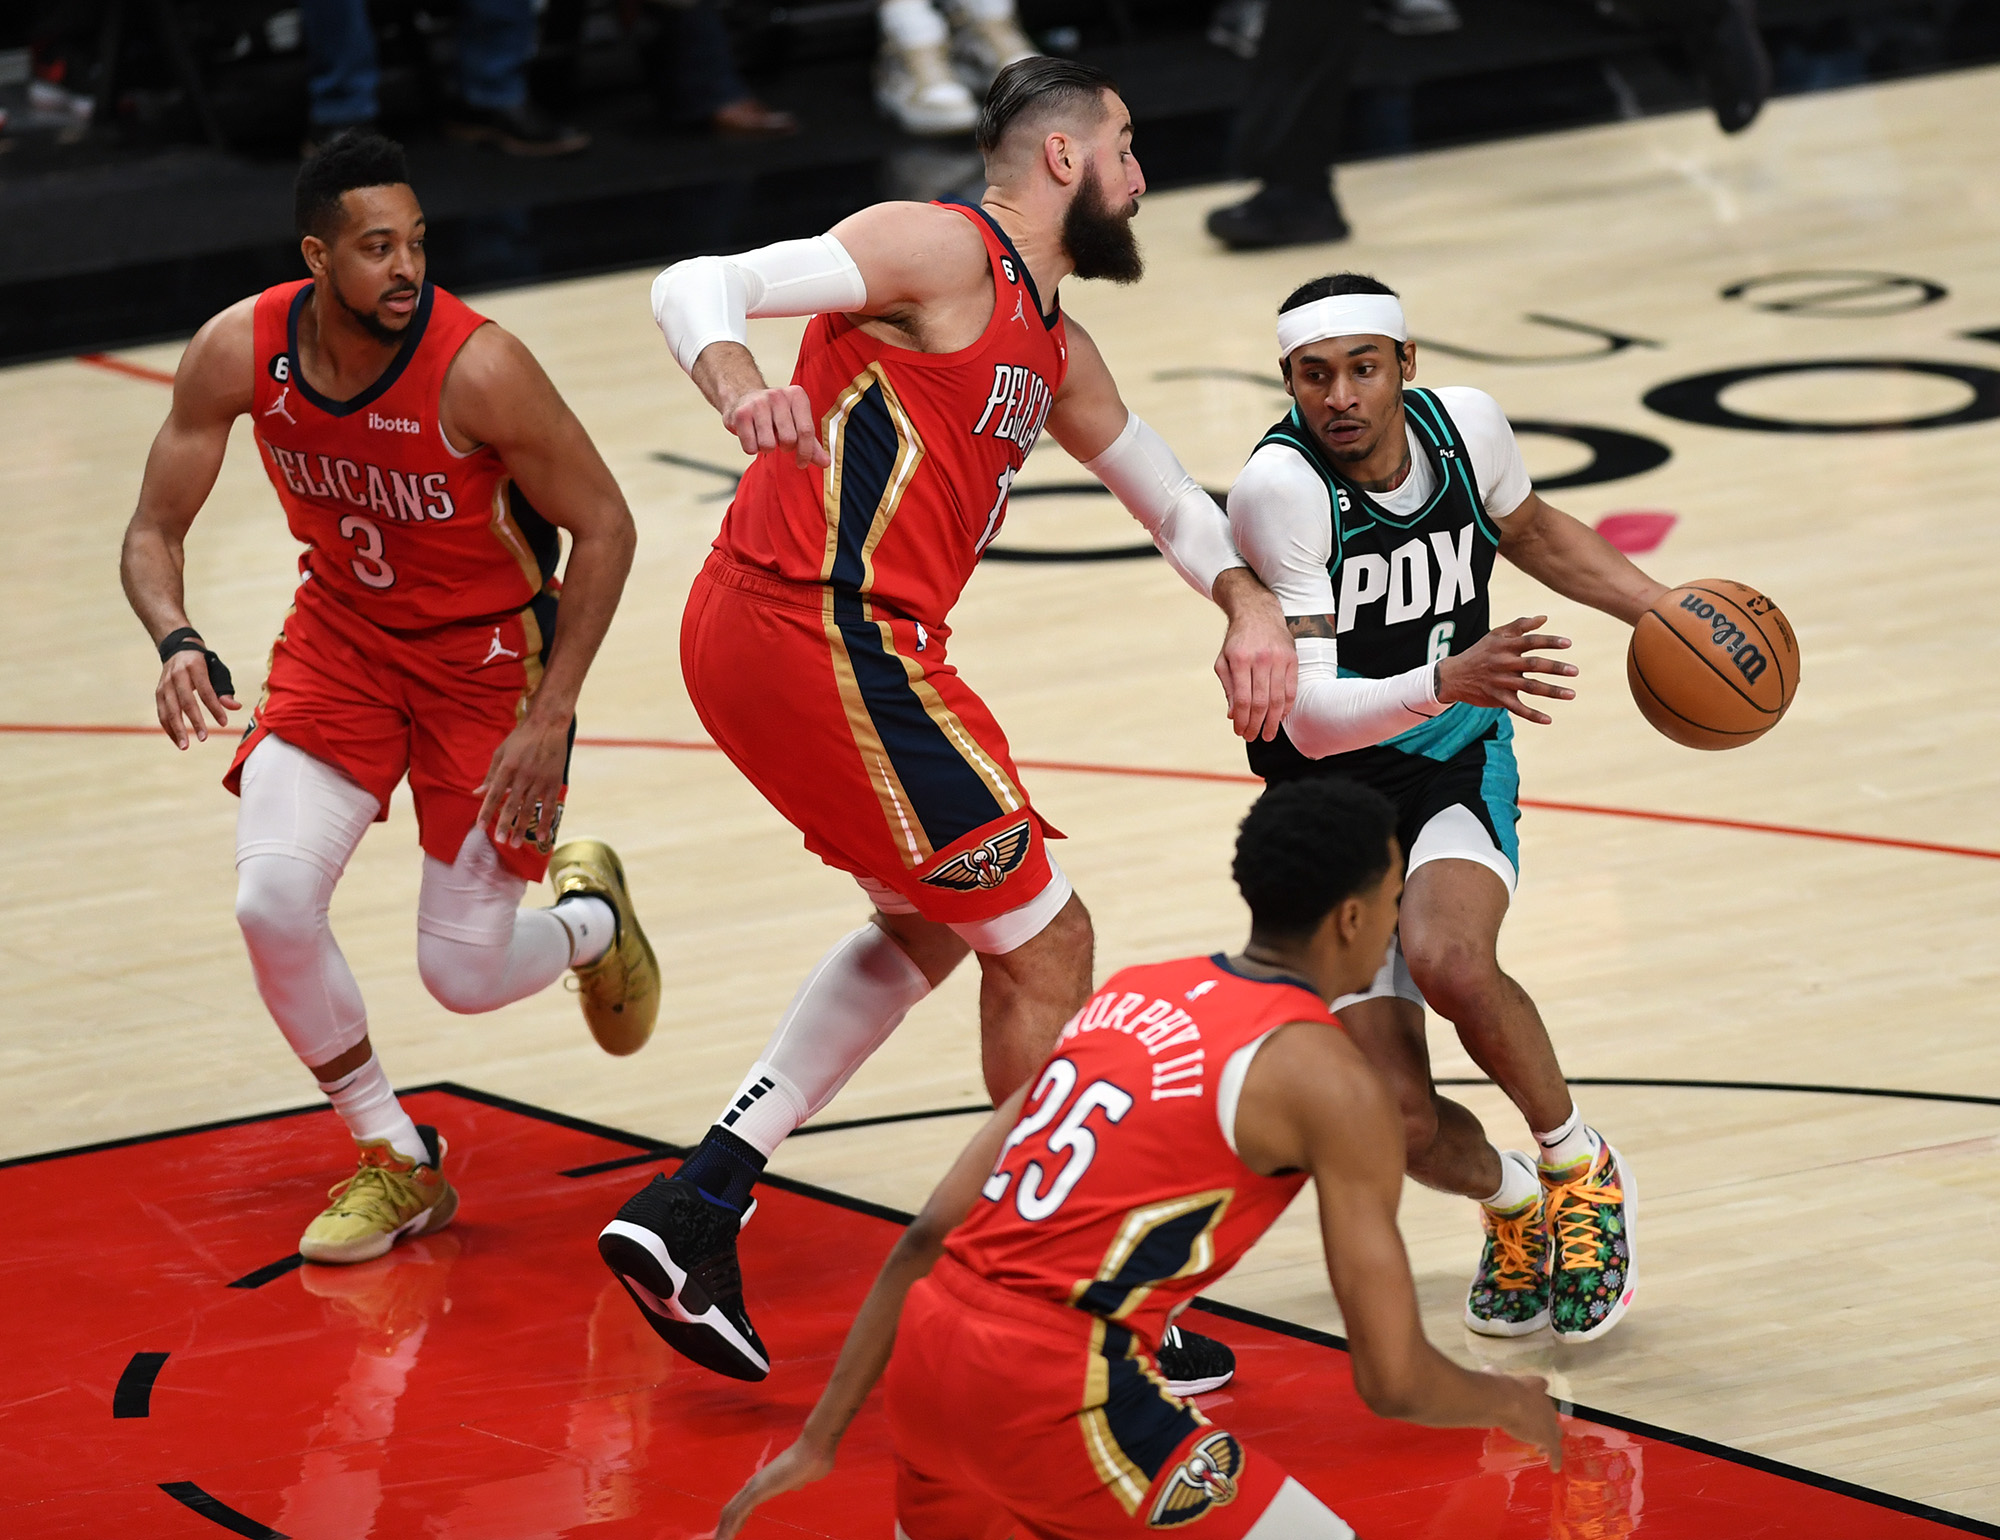 Portland shooting guard Keon Johnson, right, drives to the basket Monday, March 27, 2023, during the Trail Blazers’ 124-90 loss to the Pelicans at Moda Center.